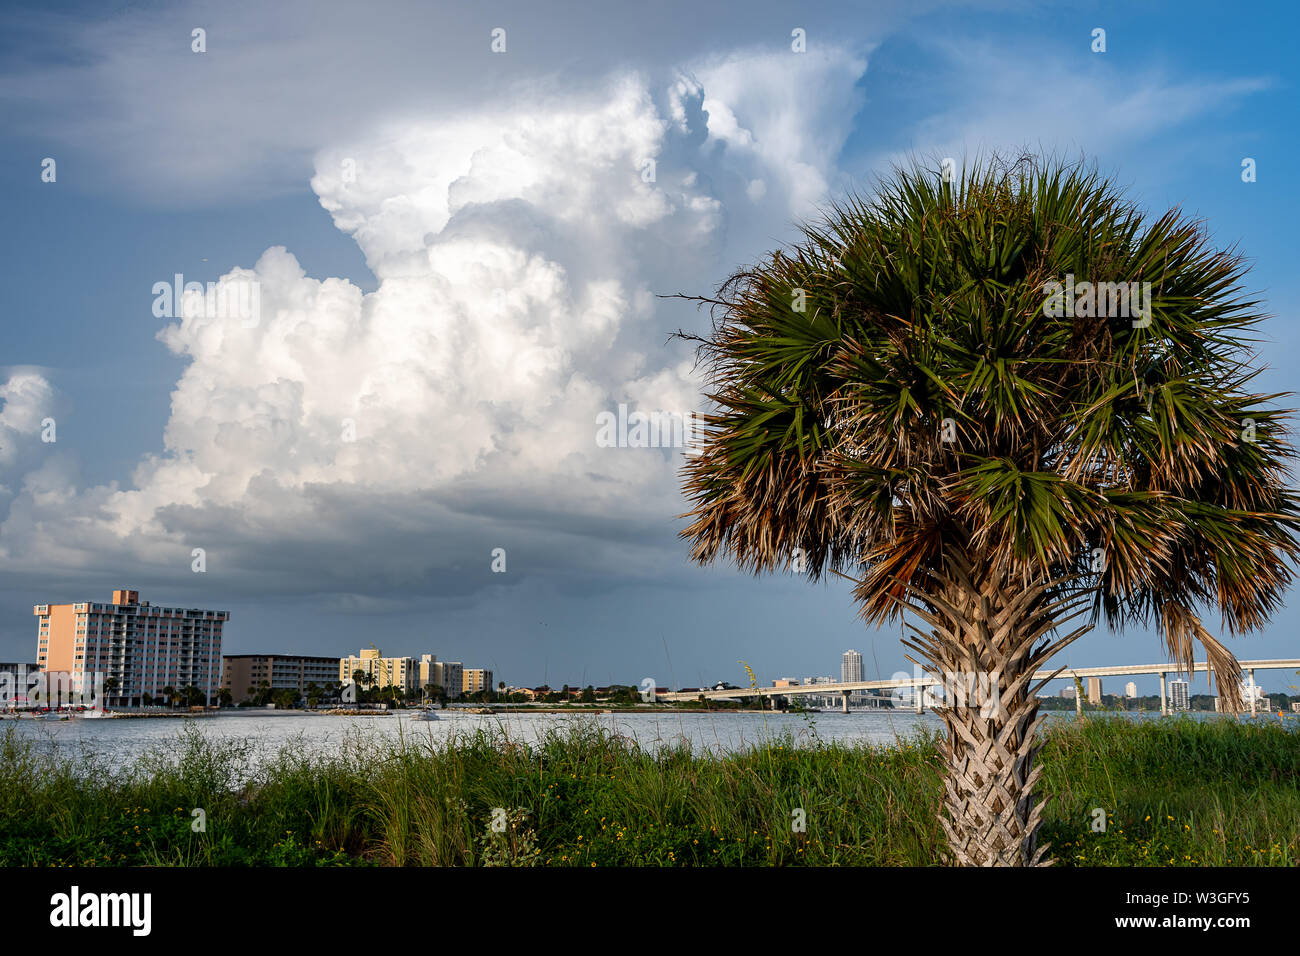 Clouds gather in the sky at the beach for the summer storms in Florida Stock Photo